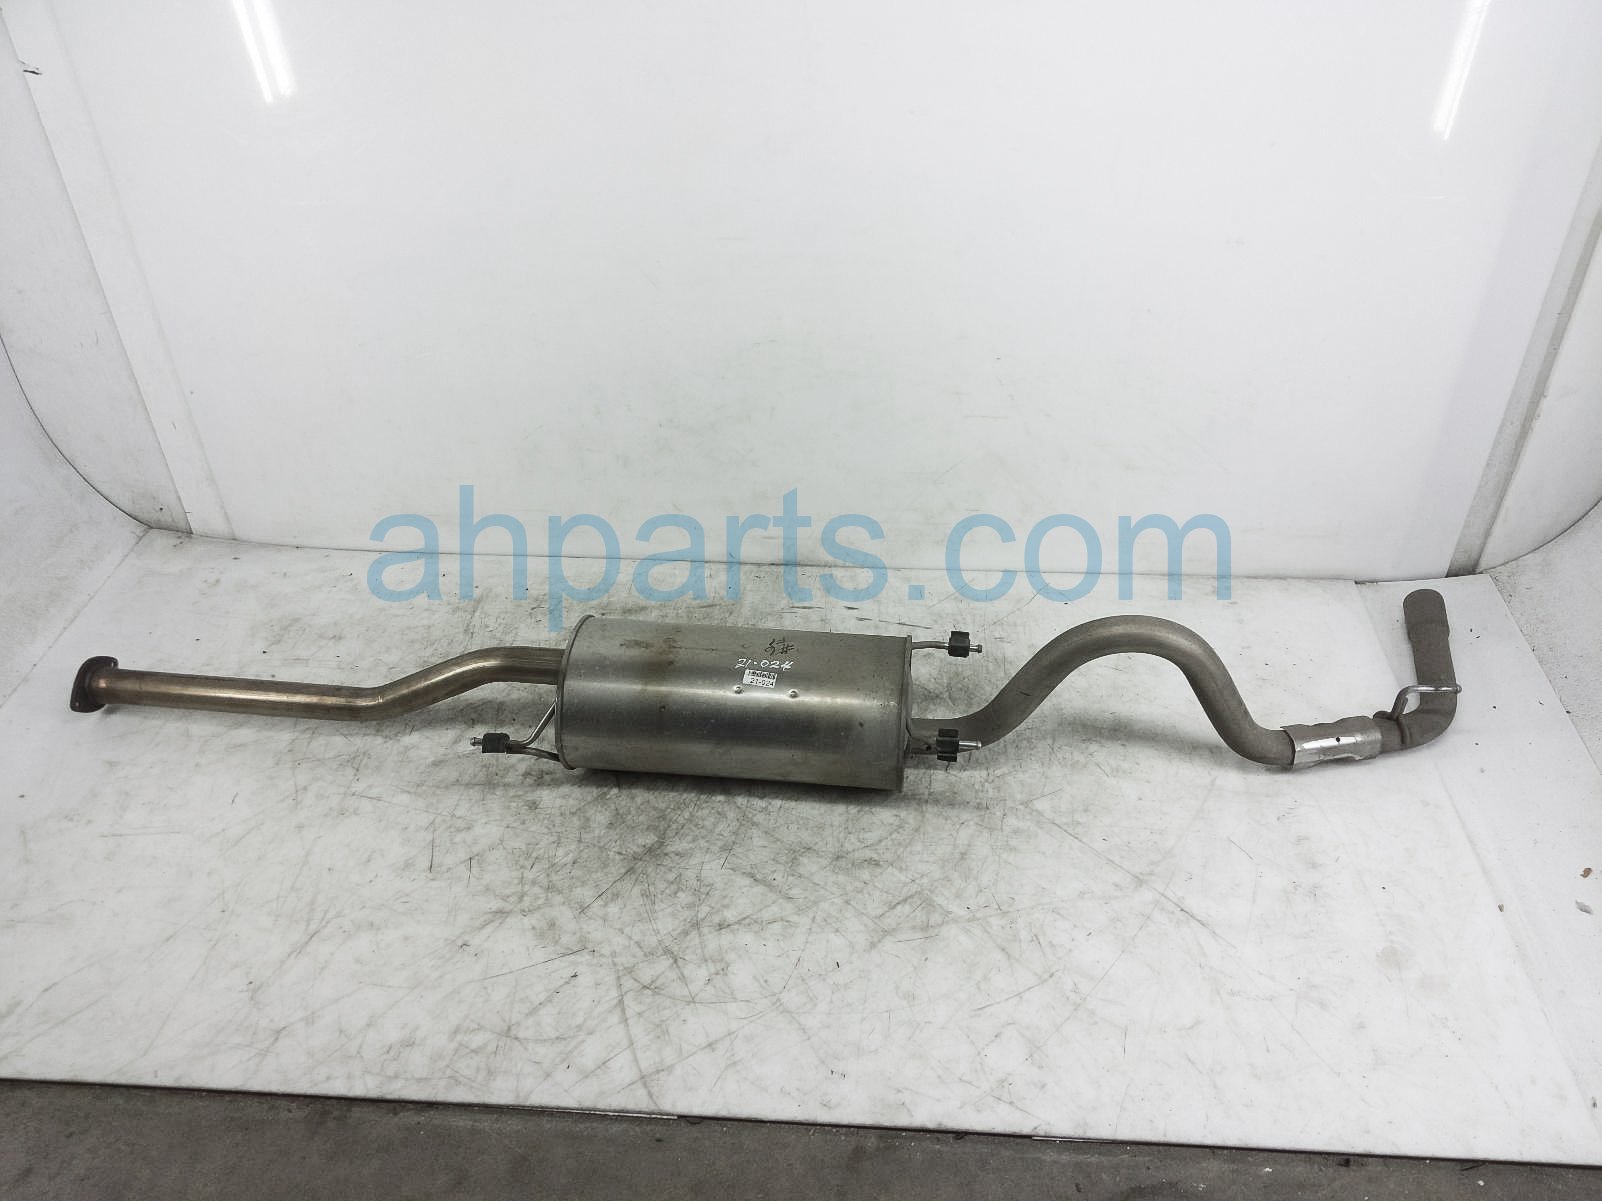 $200 Toyota EXHAUST MUFFLER & TAIL PIPE ASSY -LB